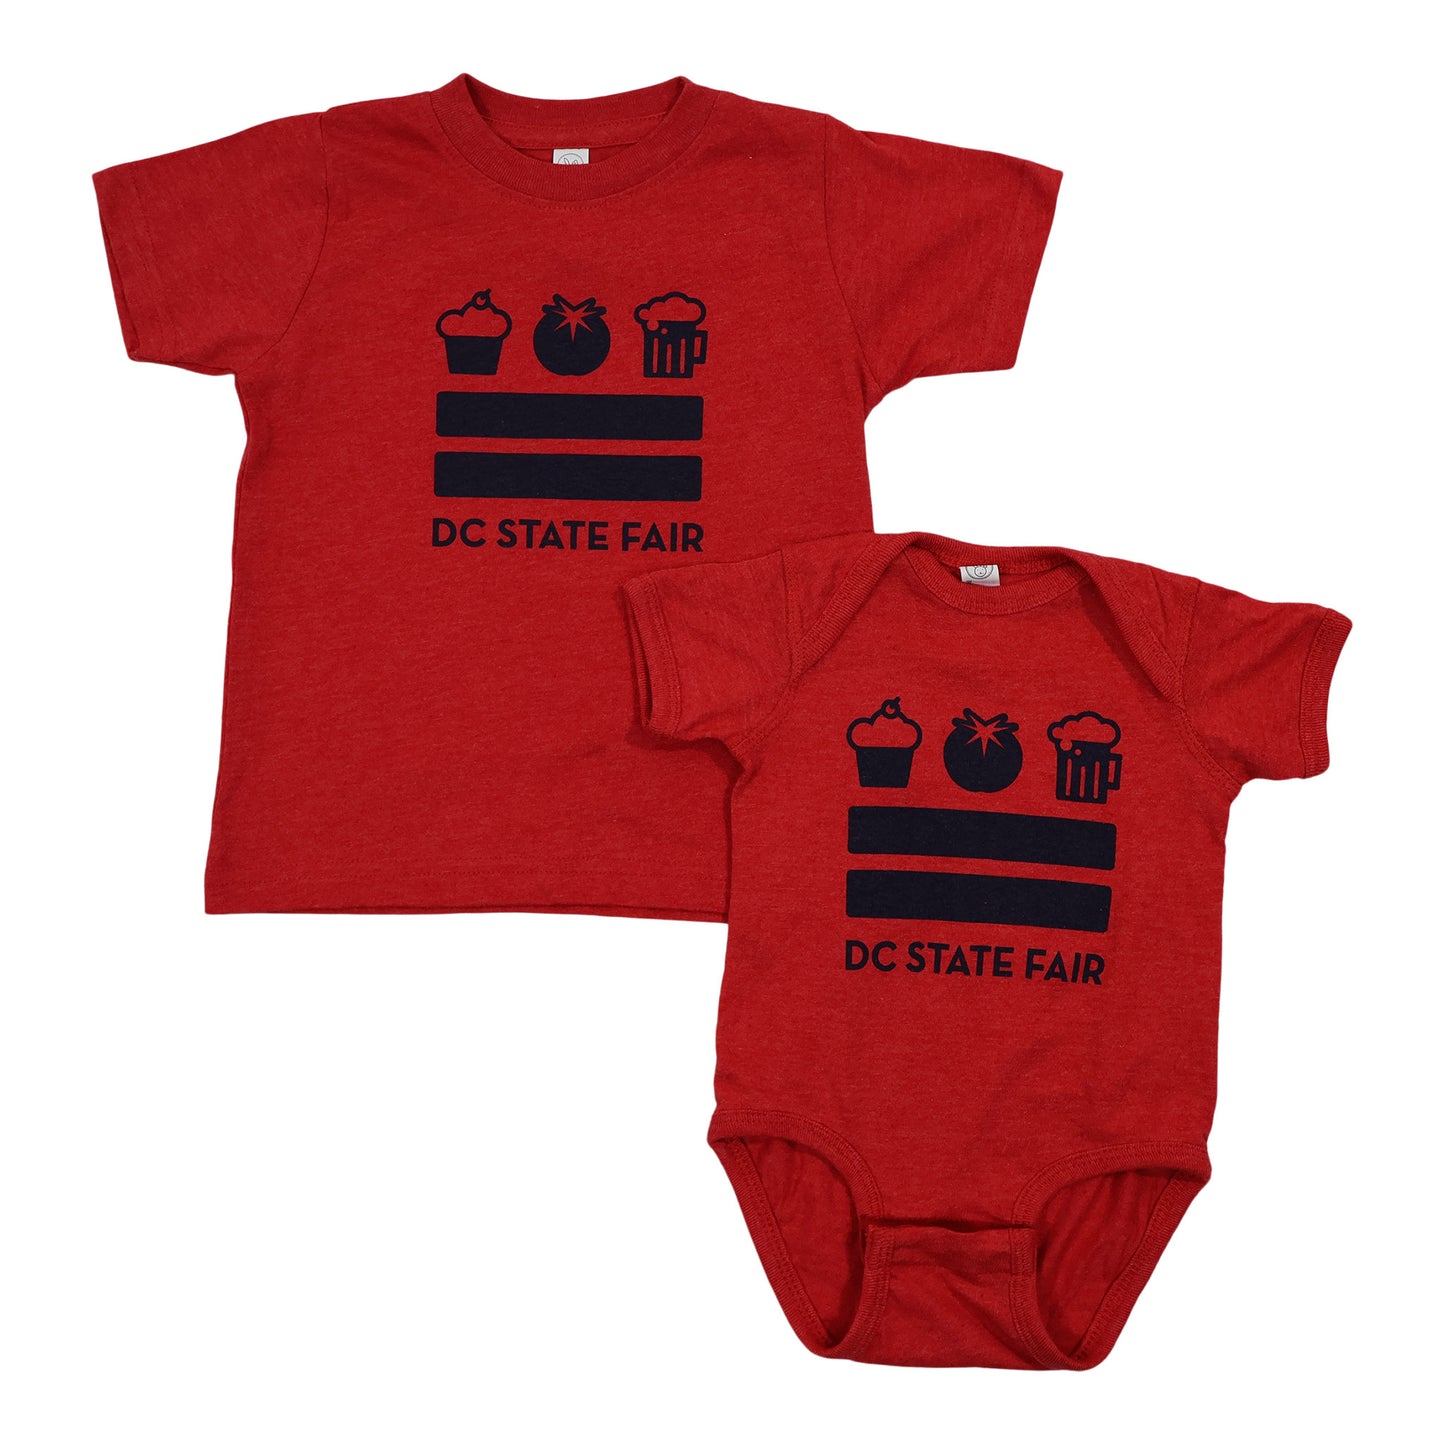 DC State Fair - Official Logo Onesies & Toddler shirts